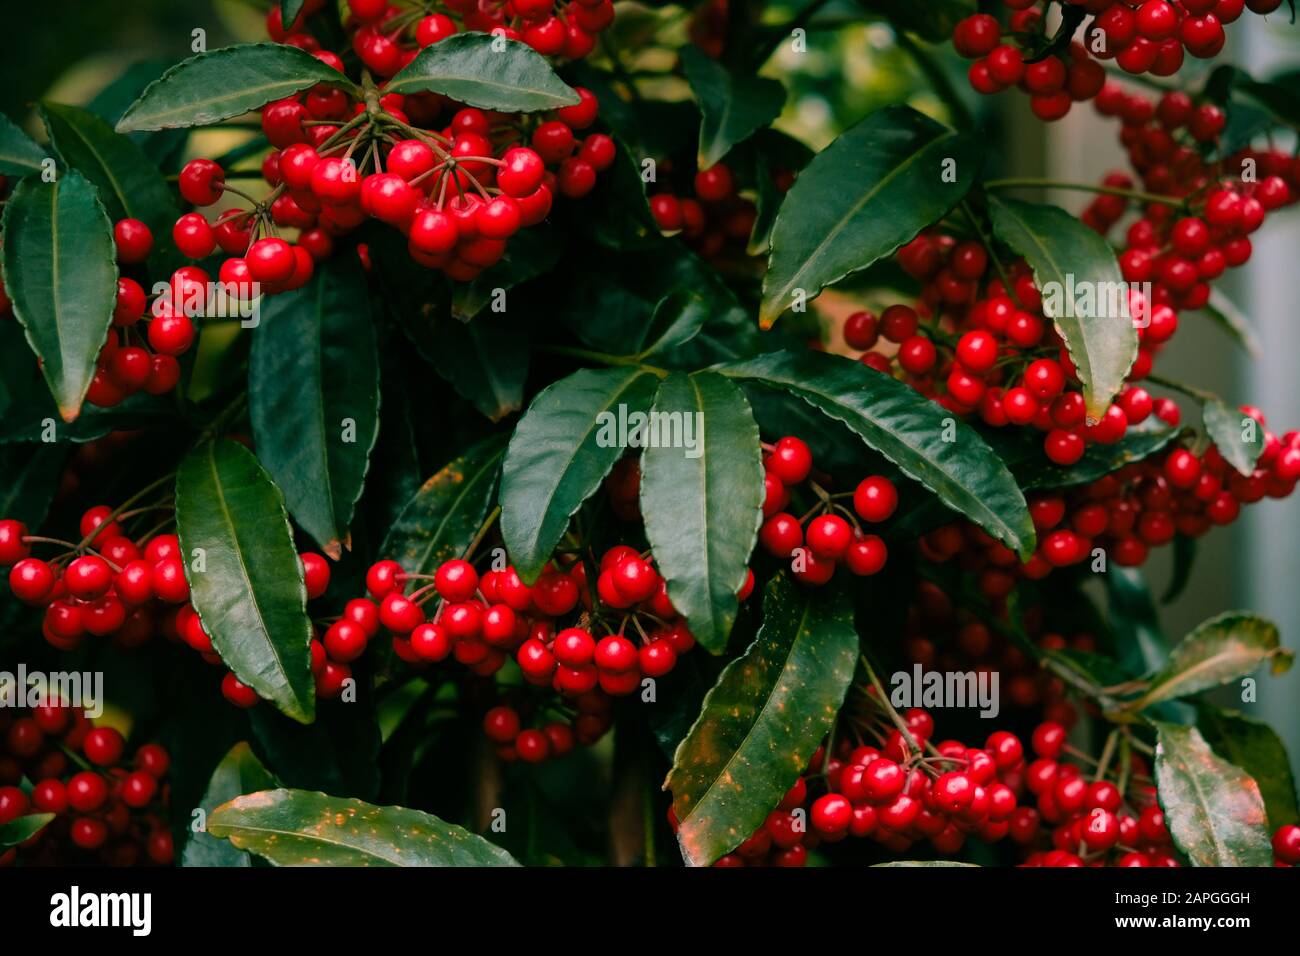 Red fruits of ardisia crenata or coral berrie in Japanese winter / Christmas berry Stock Photo